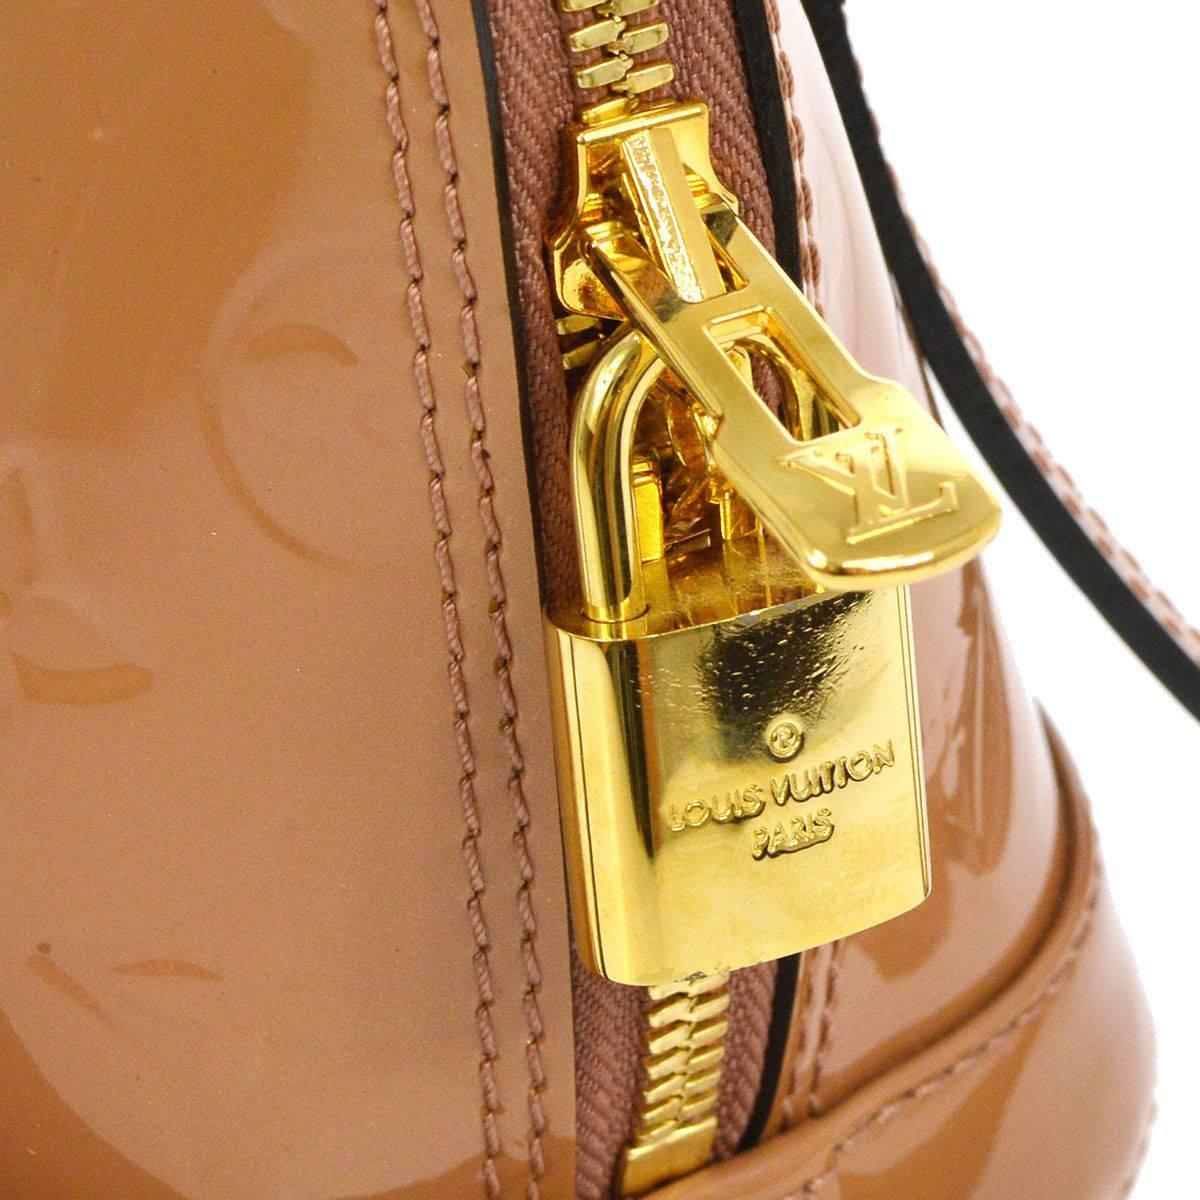 Louis Vuitton Cognac Patent Evening Top Handle Satchel Shoulder Bag With All Accessories

Patent leather
Gold tone hardware
Woven lining
Date code present
Made in France
Handle drop 4"
Measures 9.25" W x 7" H x 4.25" D 
Removable